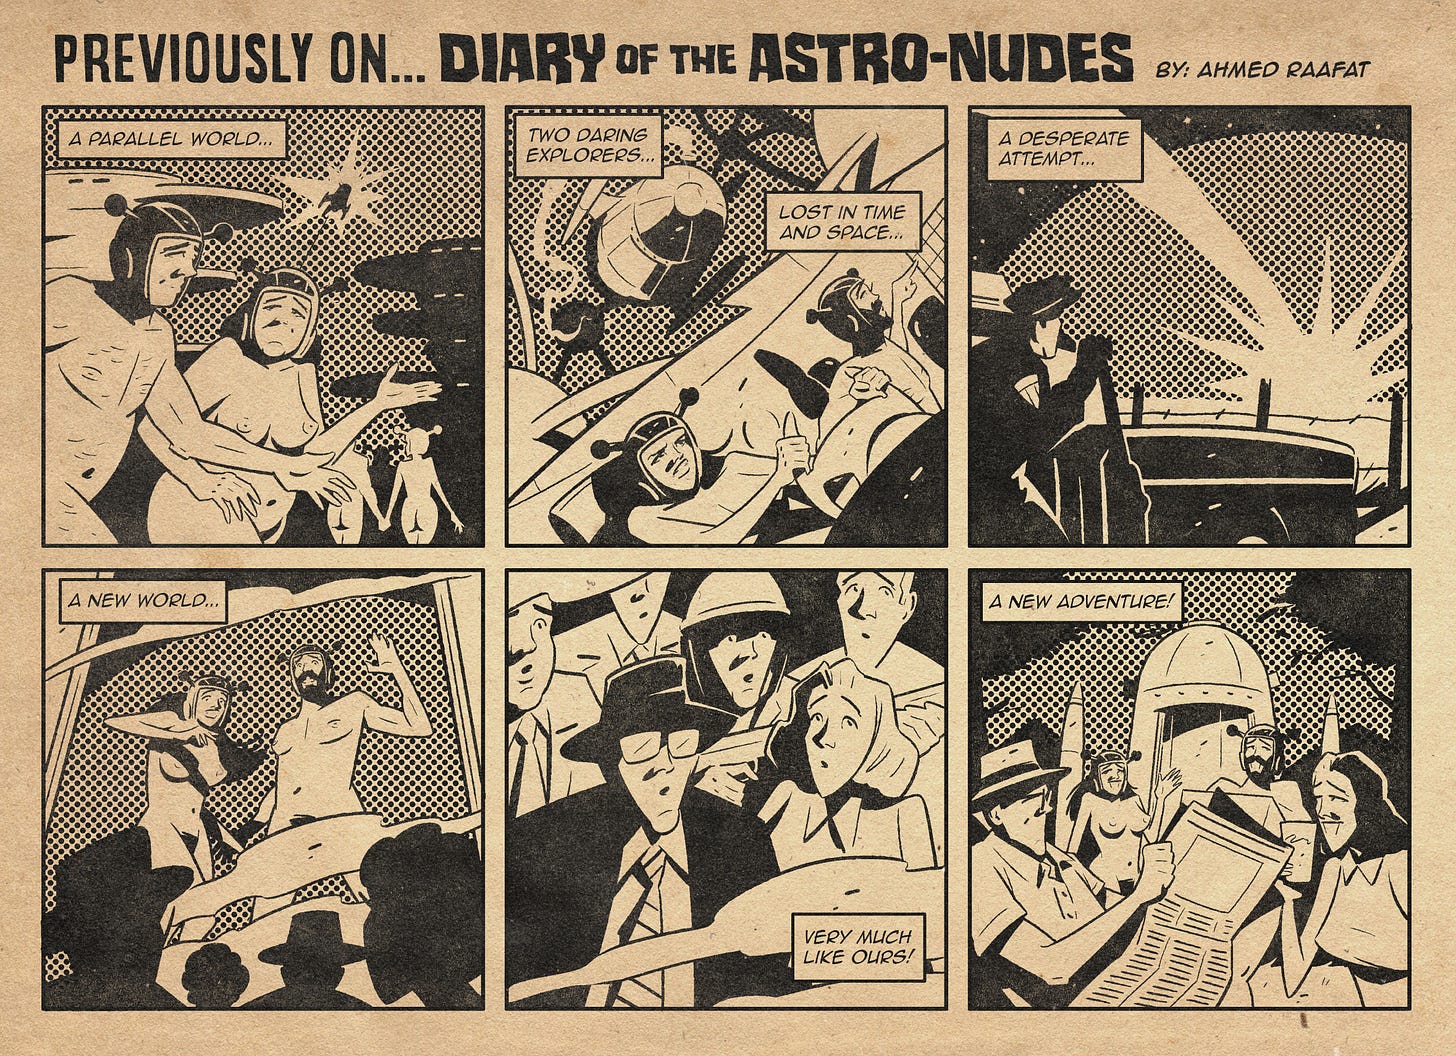 PANEL 1: This panel takes place on ASTRO-NUDES home earth. There is a nude man and woman walking in the foreground, having a friendly chatty. Others are walking in the back  PANEL 2: This panel is split into two. The top part shows ASTRO-NUDES ship flying in a quantum dimension, with smoke billowing from it. The bottom part shows the ASTRO-NUDES struggling to maneuver the ship  PANEL 3: A police car with a policeman standing outside looks across a field as an object trails through the sky and crashes in the distance.  PANEL 4: A door opens revealing the ASTRO-NUDES to a crowd of people.  PANEL 5: A shot of the crowd. BRAD and JANET, future hosts of the ASTRO-NUDES are looking up.   PANEL 6: BRAD, JANET and the ASTRO-NUDES are in a house garden. BRAD is reading the newspaper, JANET is holding a drink. Everyone is smiling. The ASTRO-NUDES ship is in the back.  